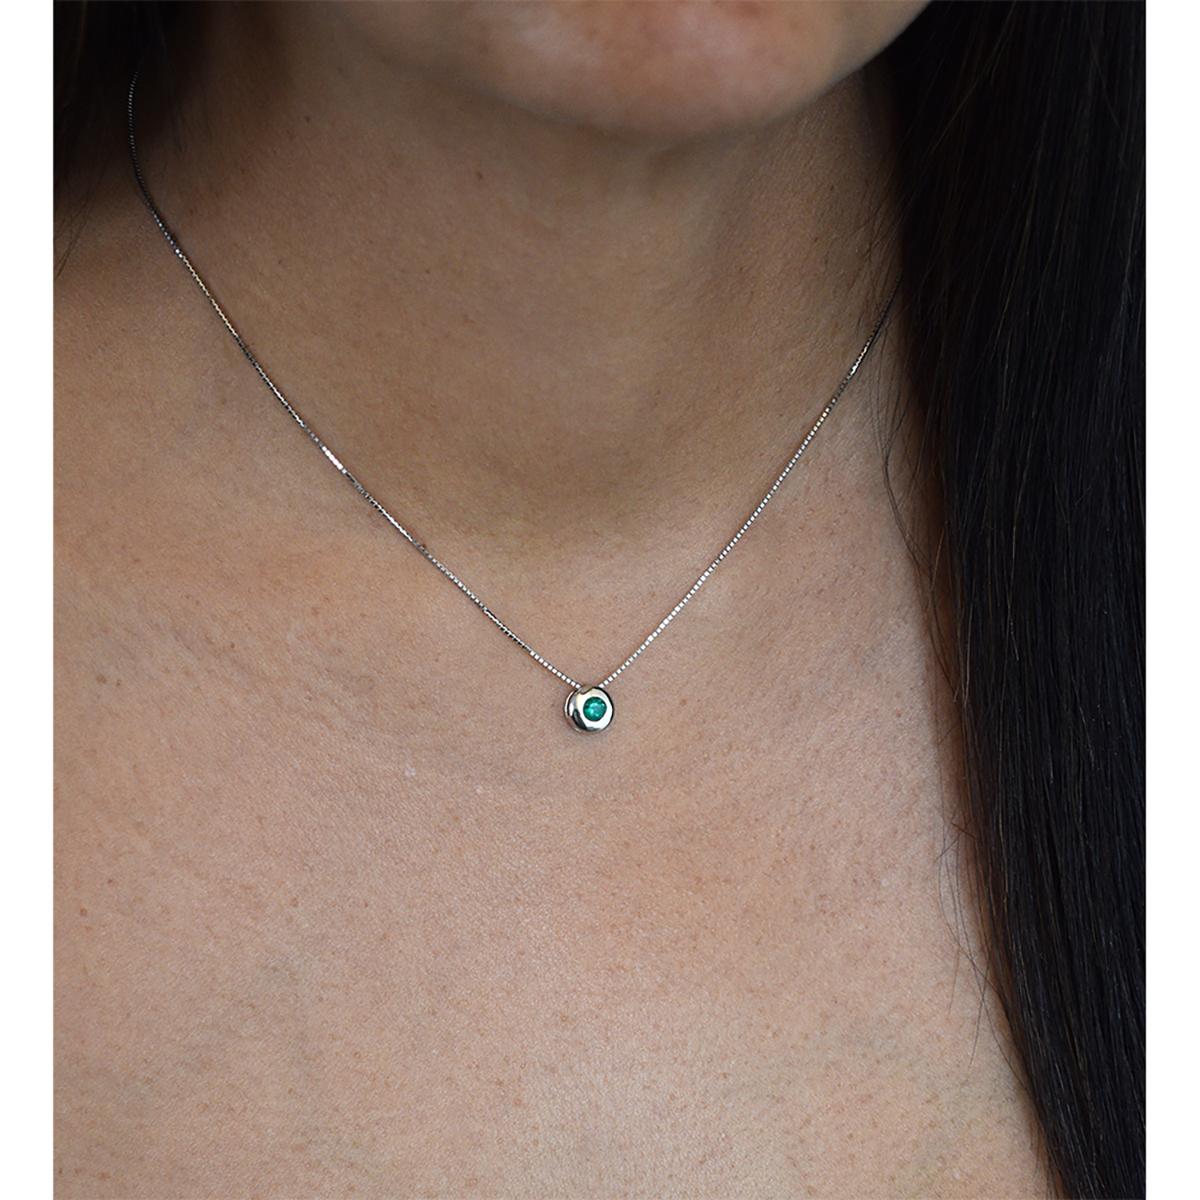 18K white gold solitaire emerald necklace with 0.25 carats round cut real natural emerald in bezel setting. The smooth style and the high polish finished of the gold around the emerald, creates the perfect background for the vivid green color of the